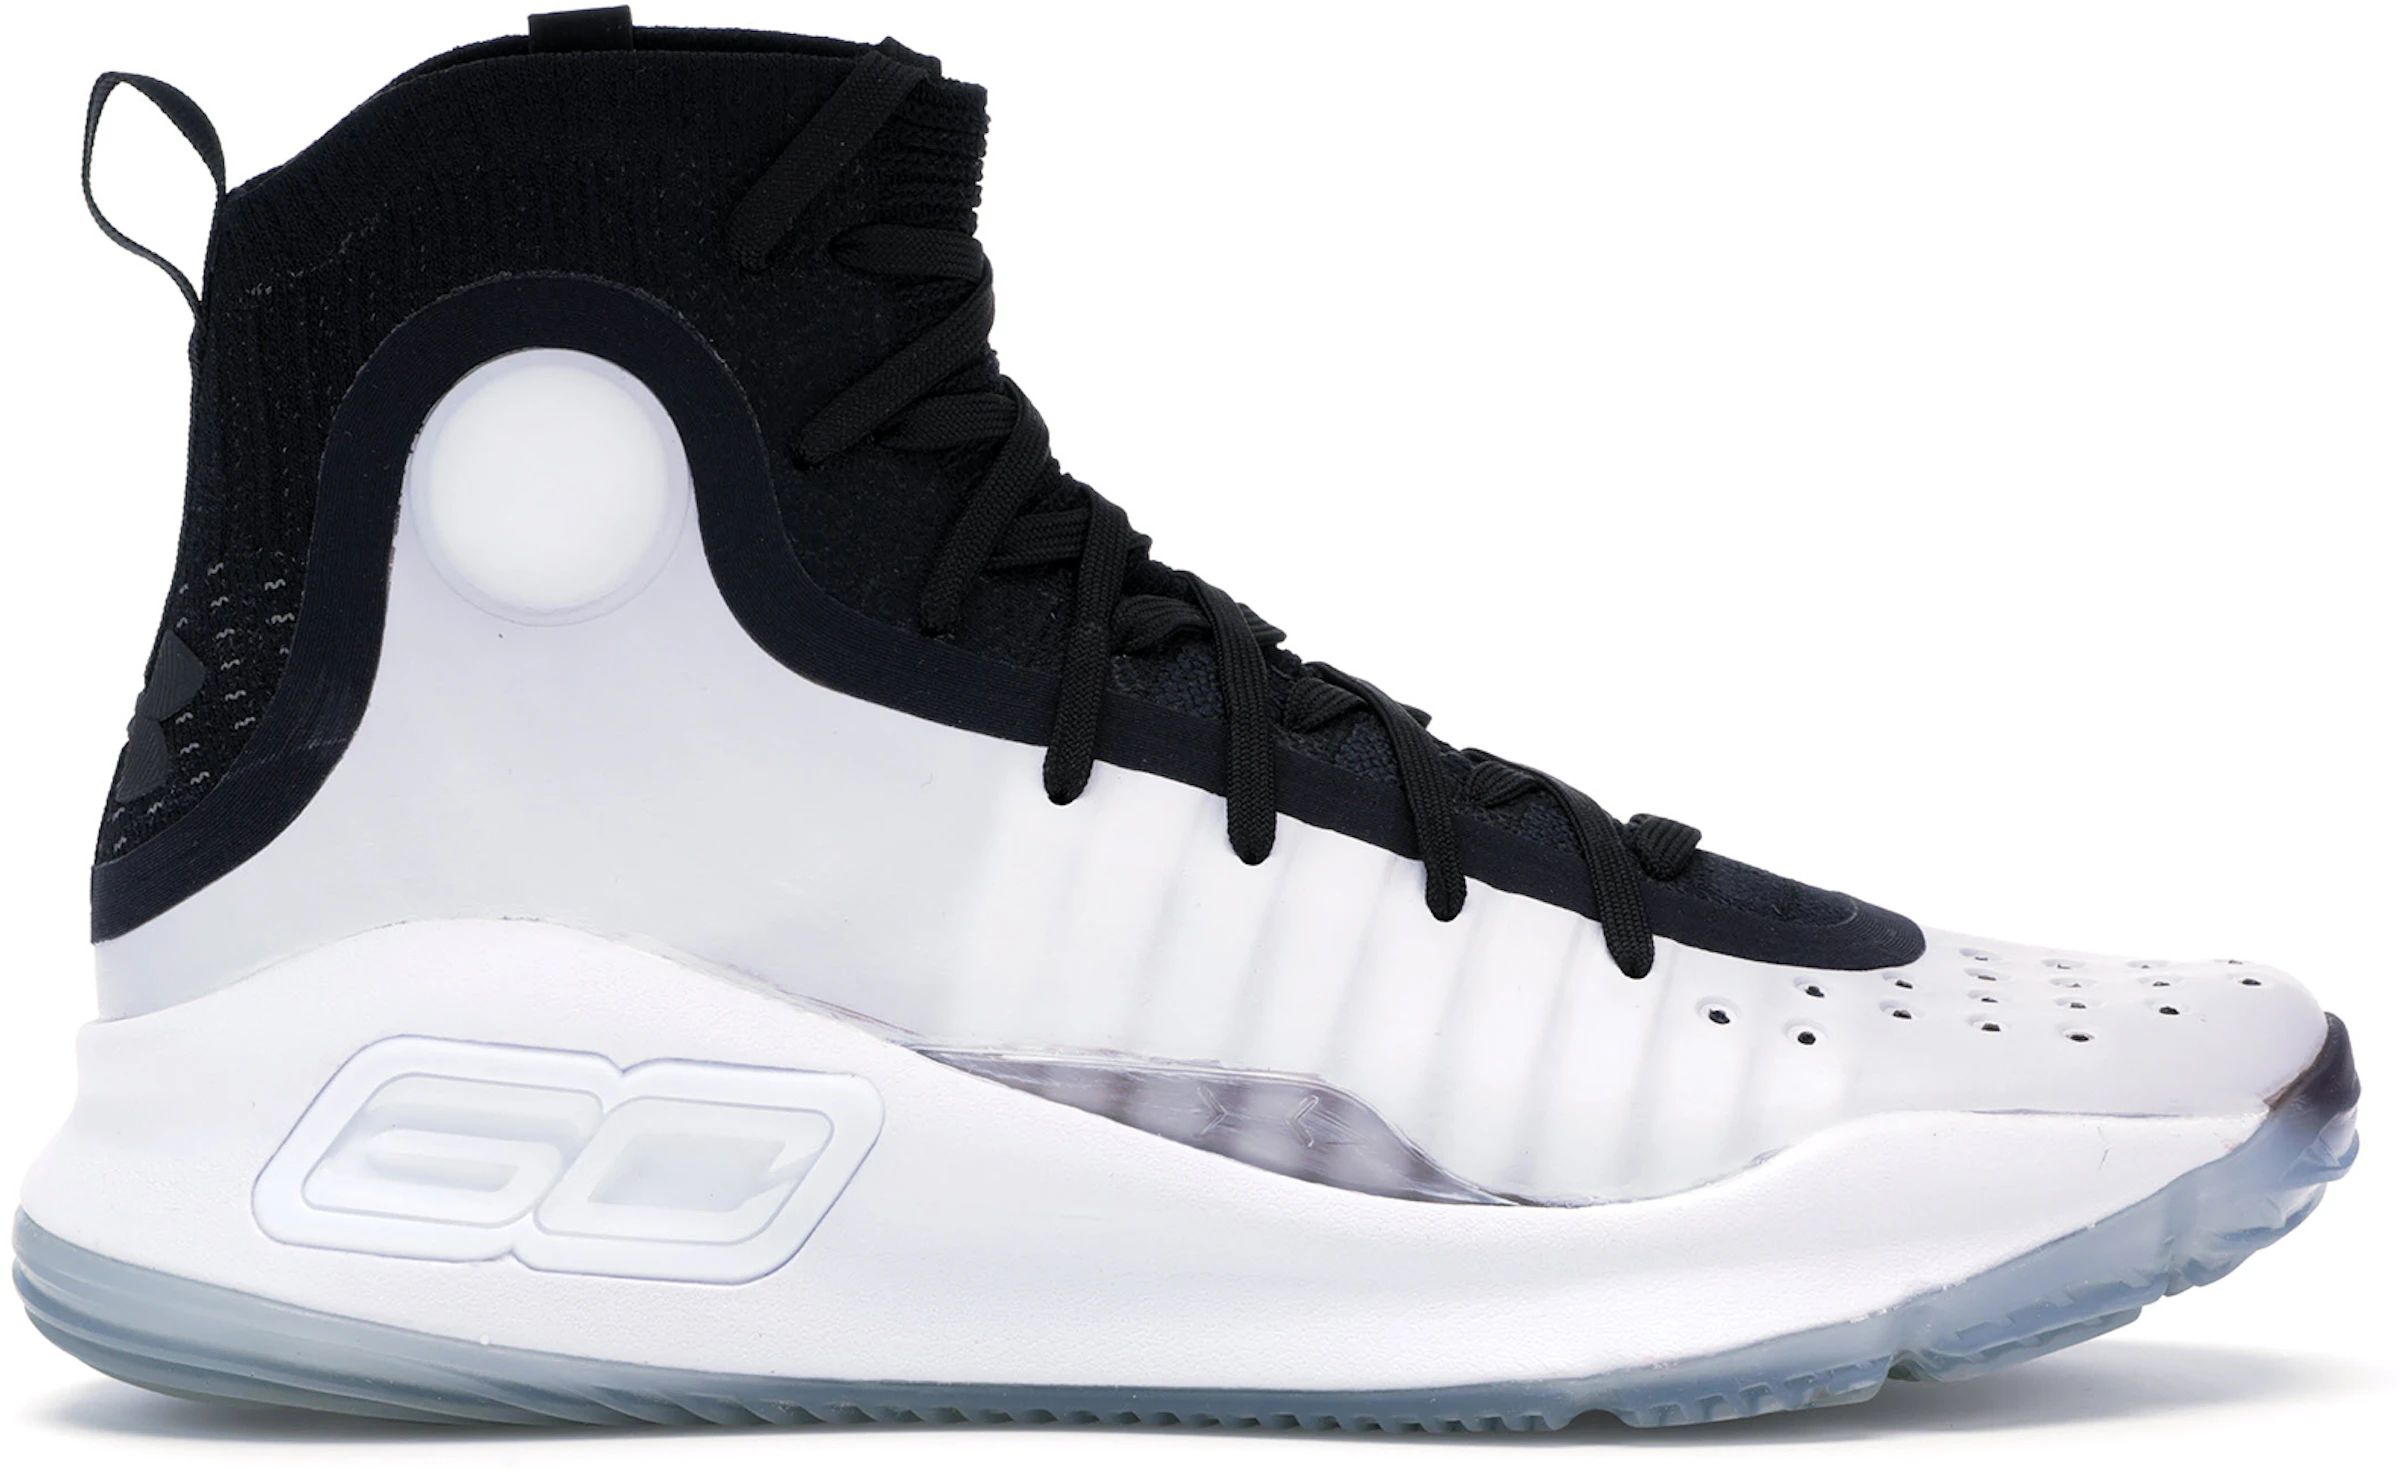 Under Armour Curry 4 White Black - 1298306-007 - US